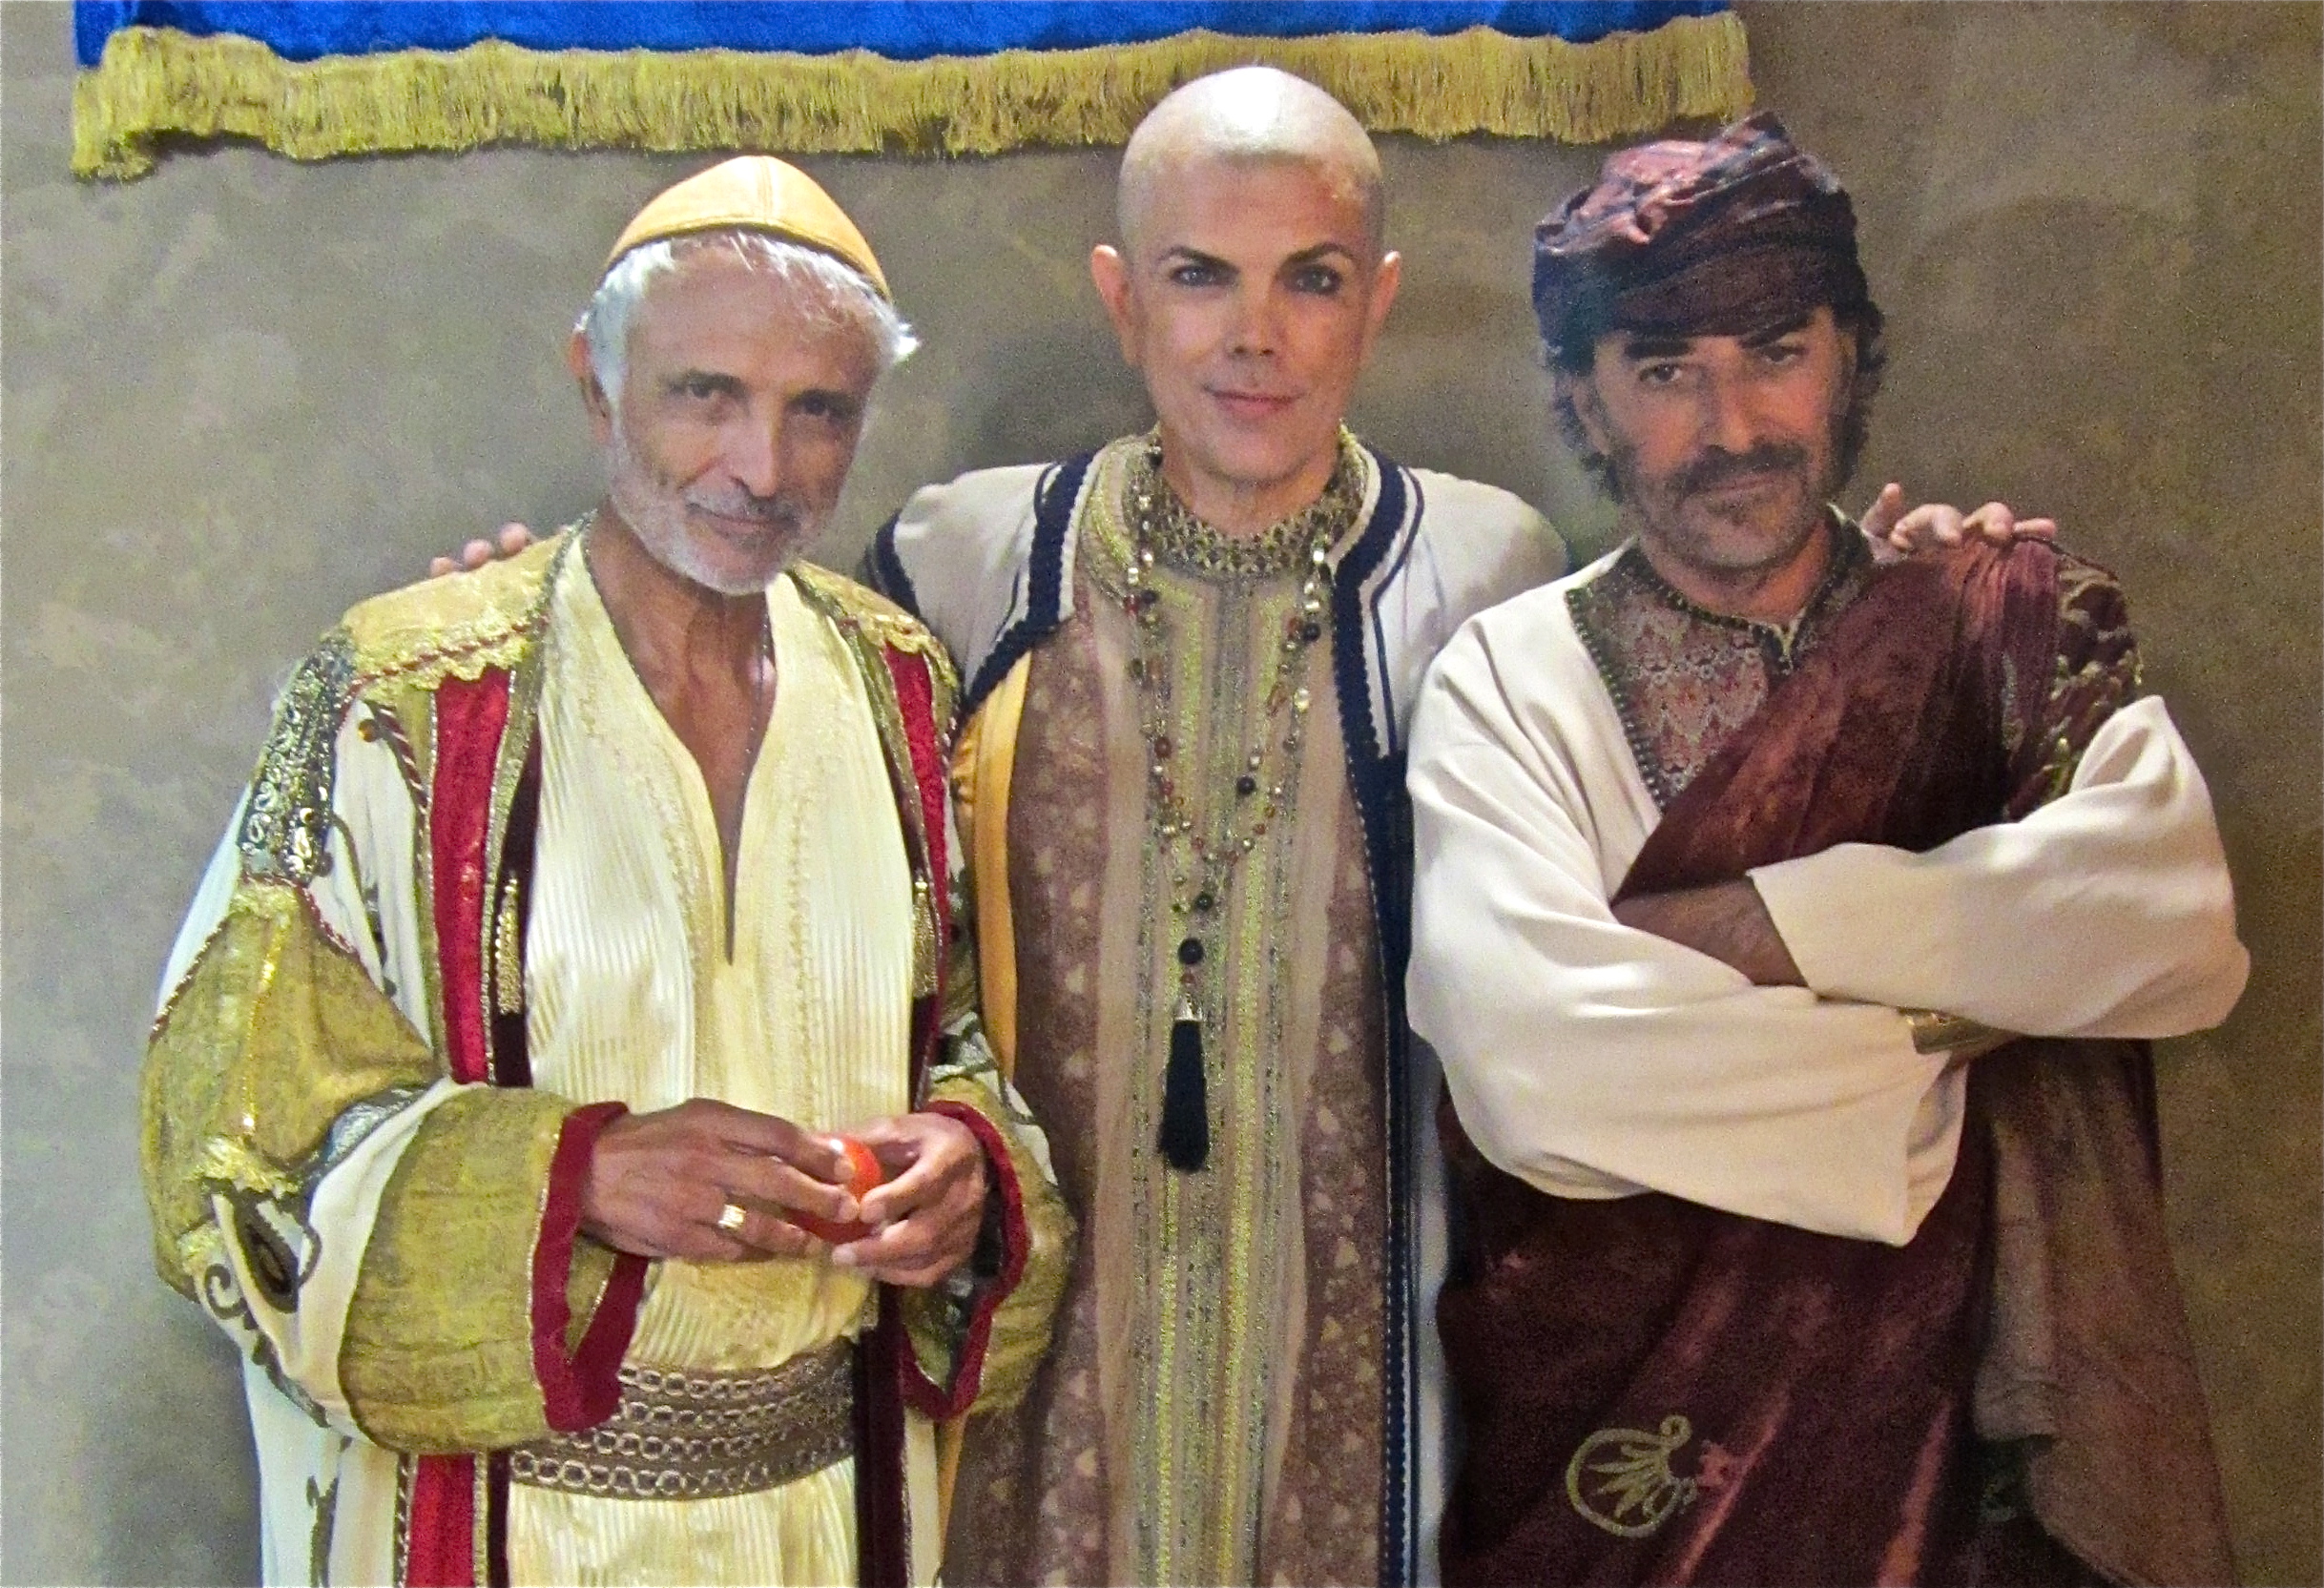 With Robert Miano & Thaao Penghlis on set of THE BOOK OF ESTHER